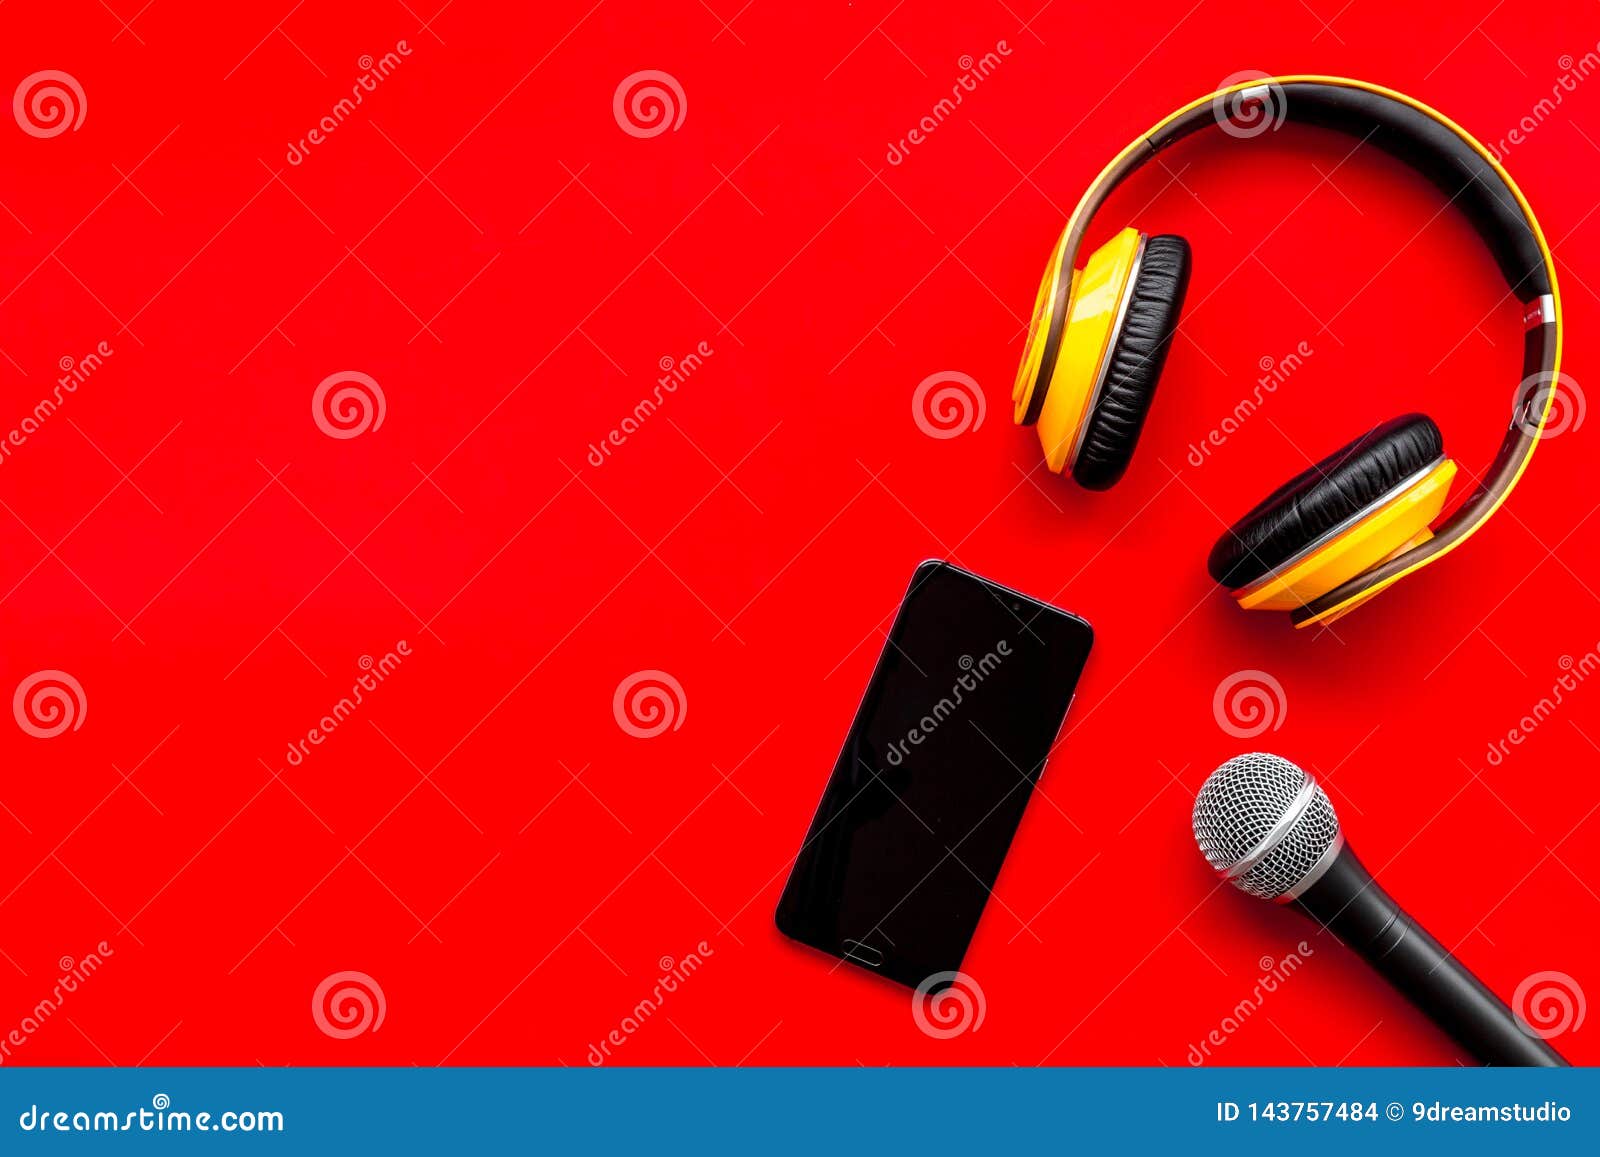 Download Microphone, Headphones, Mobile For Blogger, Journalist Or ...